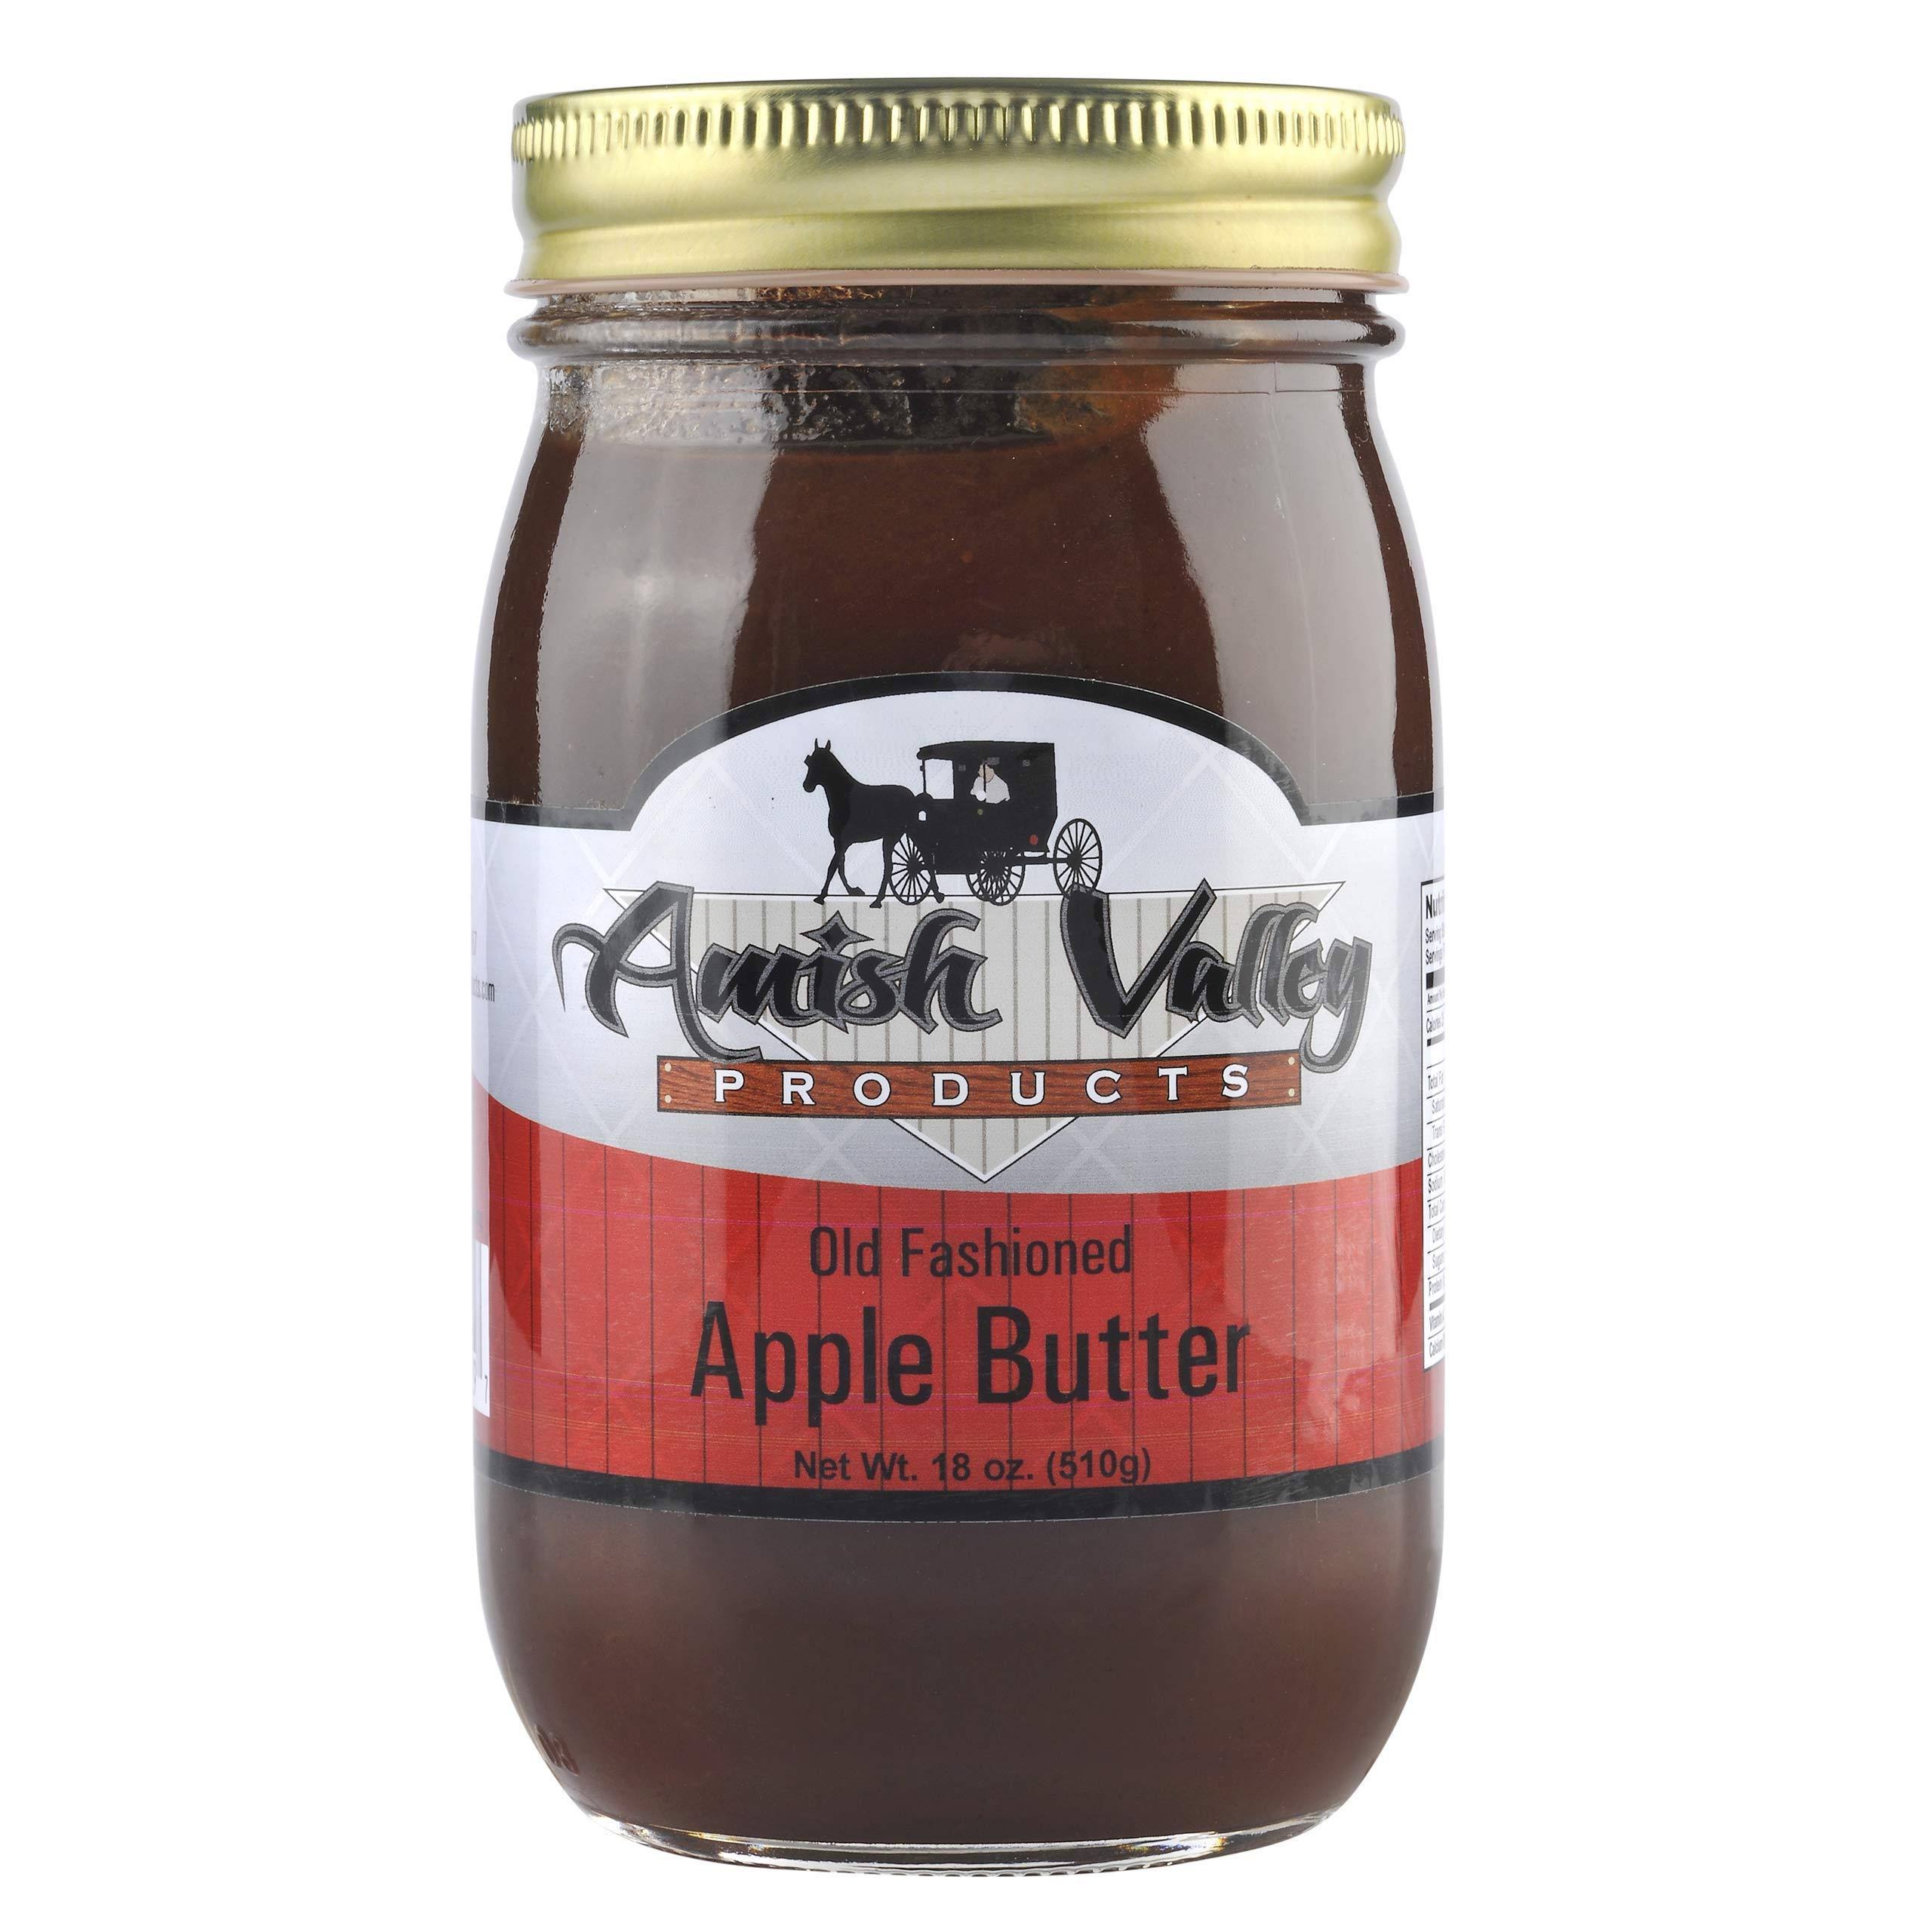 Amish Valley Products Apple Butter Glass Jar Old Fashioned Homestyle Slow Cooked